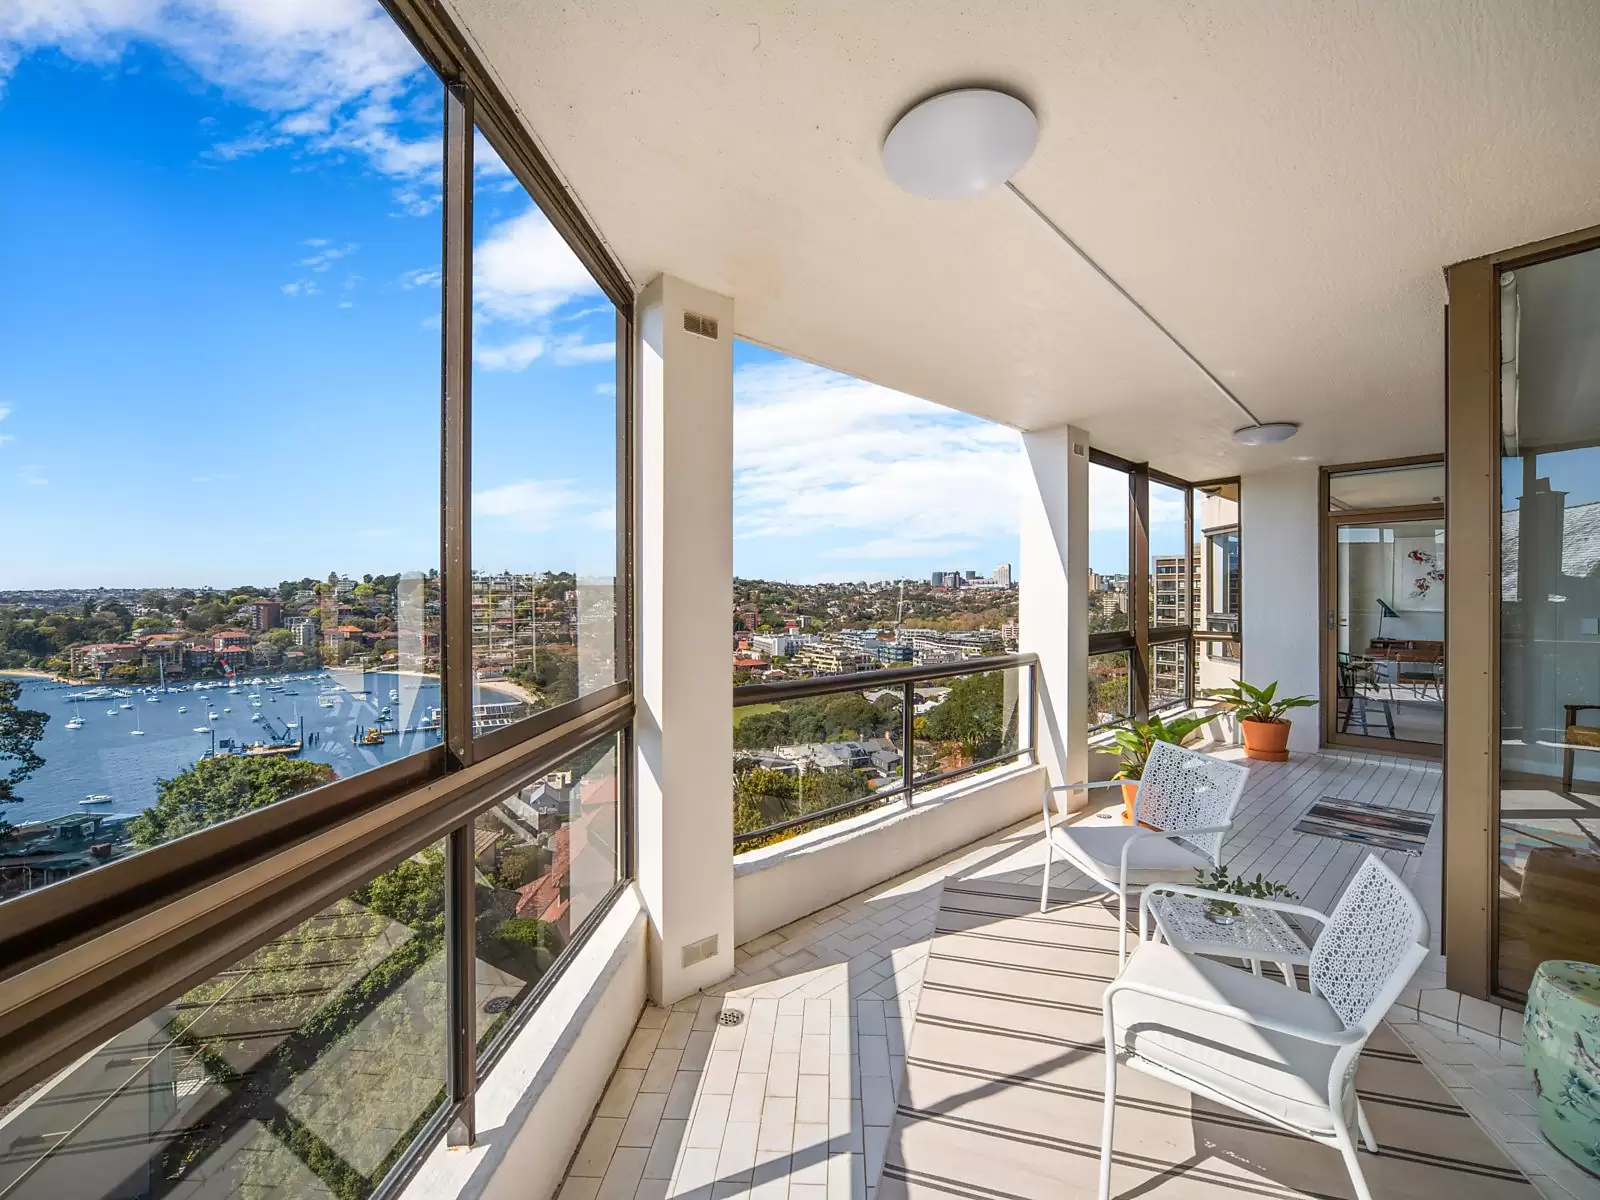 Photo #4: 11/14 Eastbourne Road, Darling Point - Sold by Sydney Sotheby's International Realty